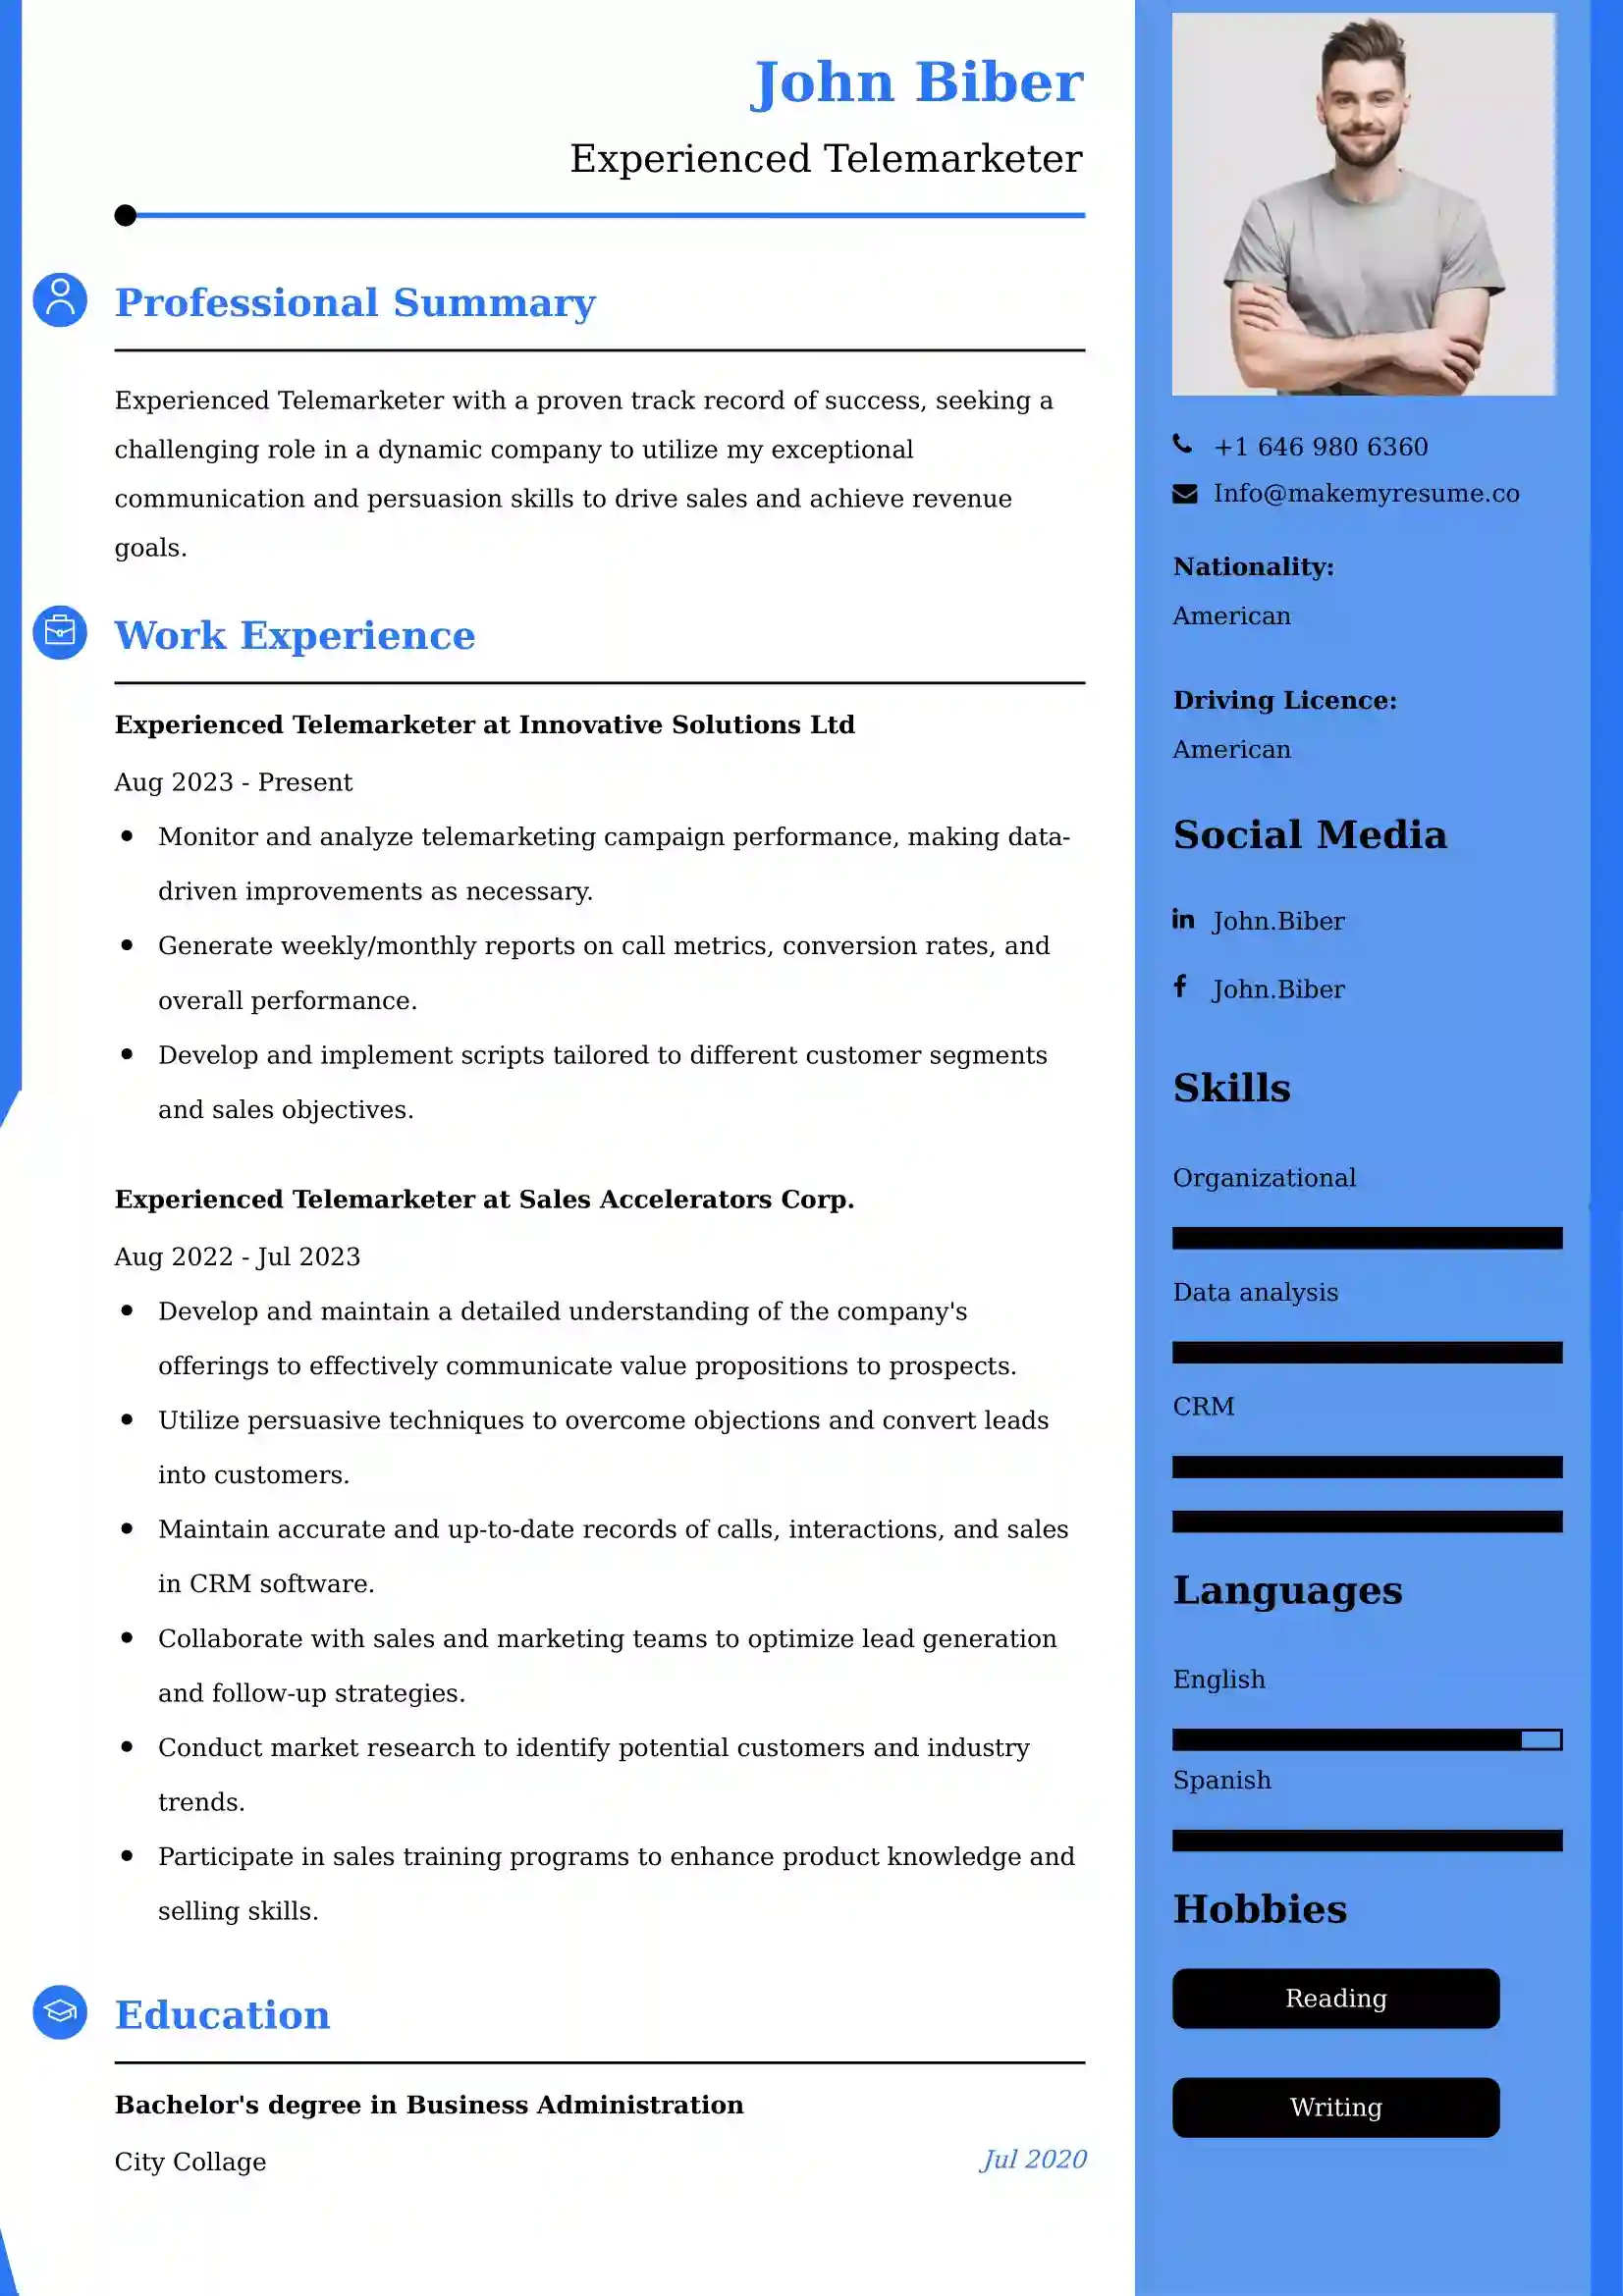 Experienced Telemarketer Resume Examples - Brazilian Format, Latest Template